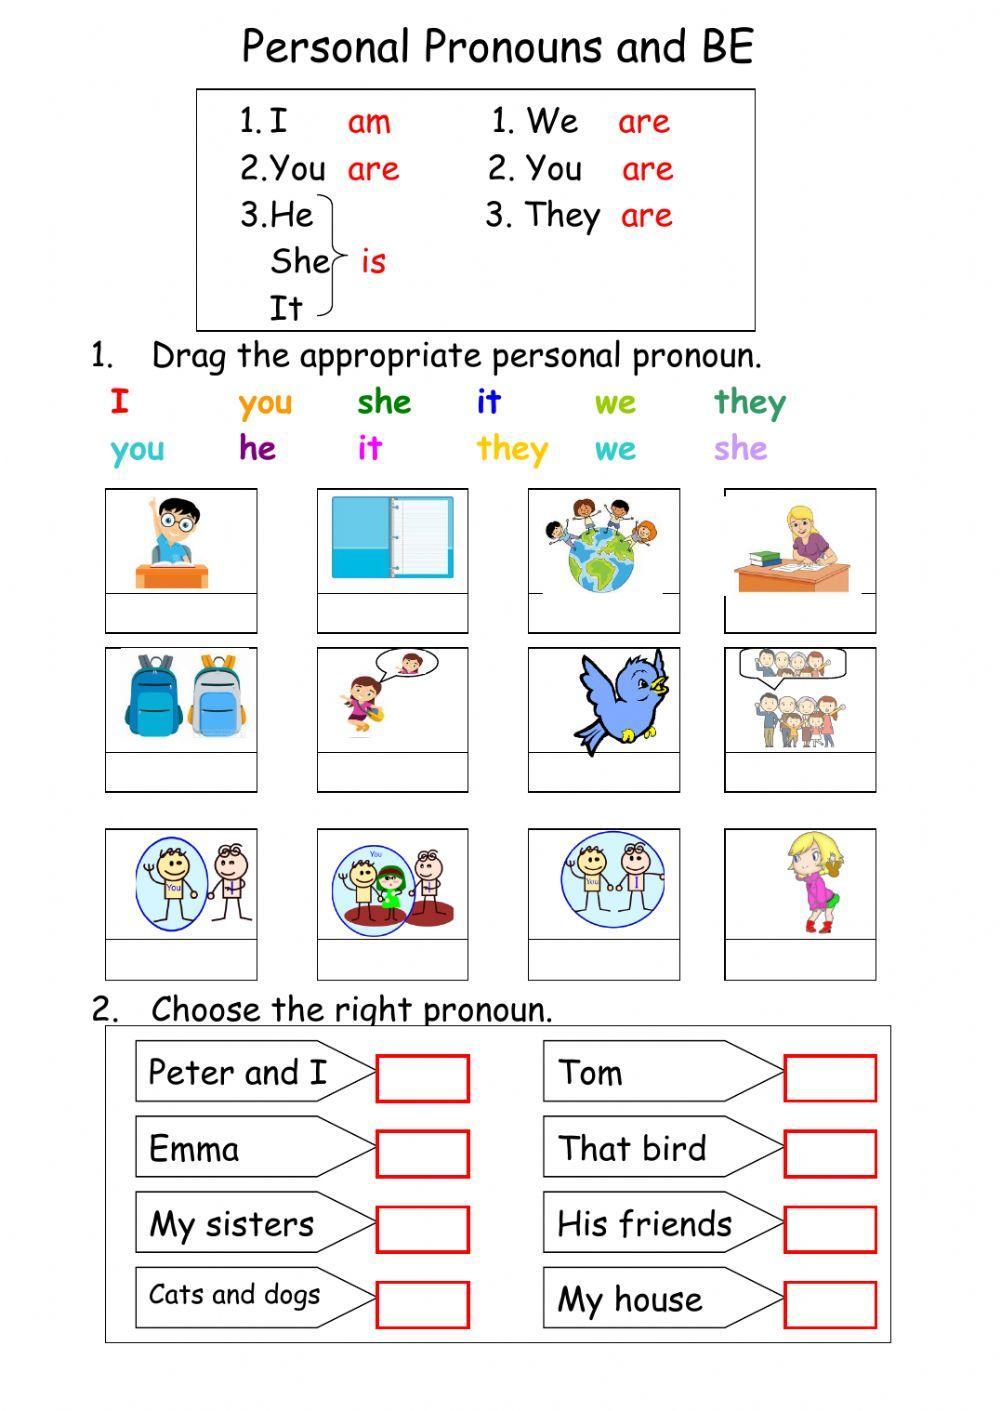 Personal pronouns and BE